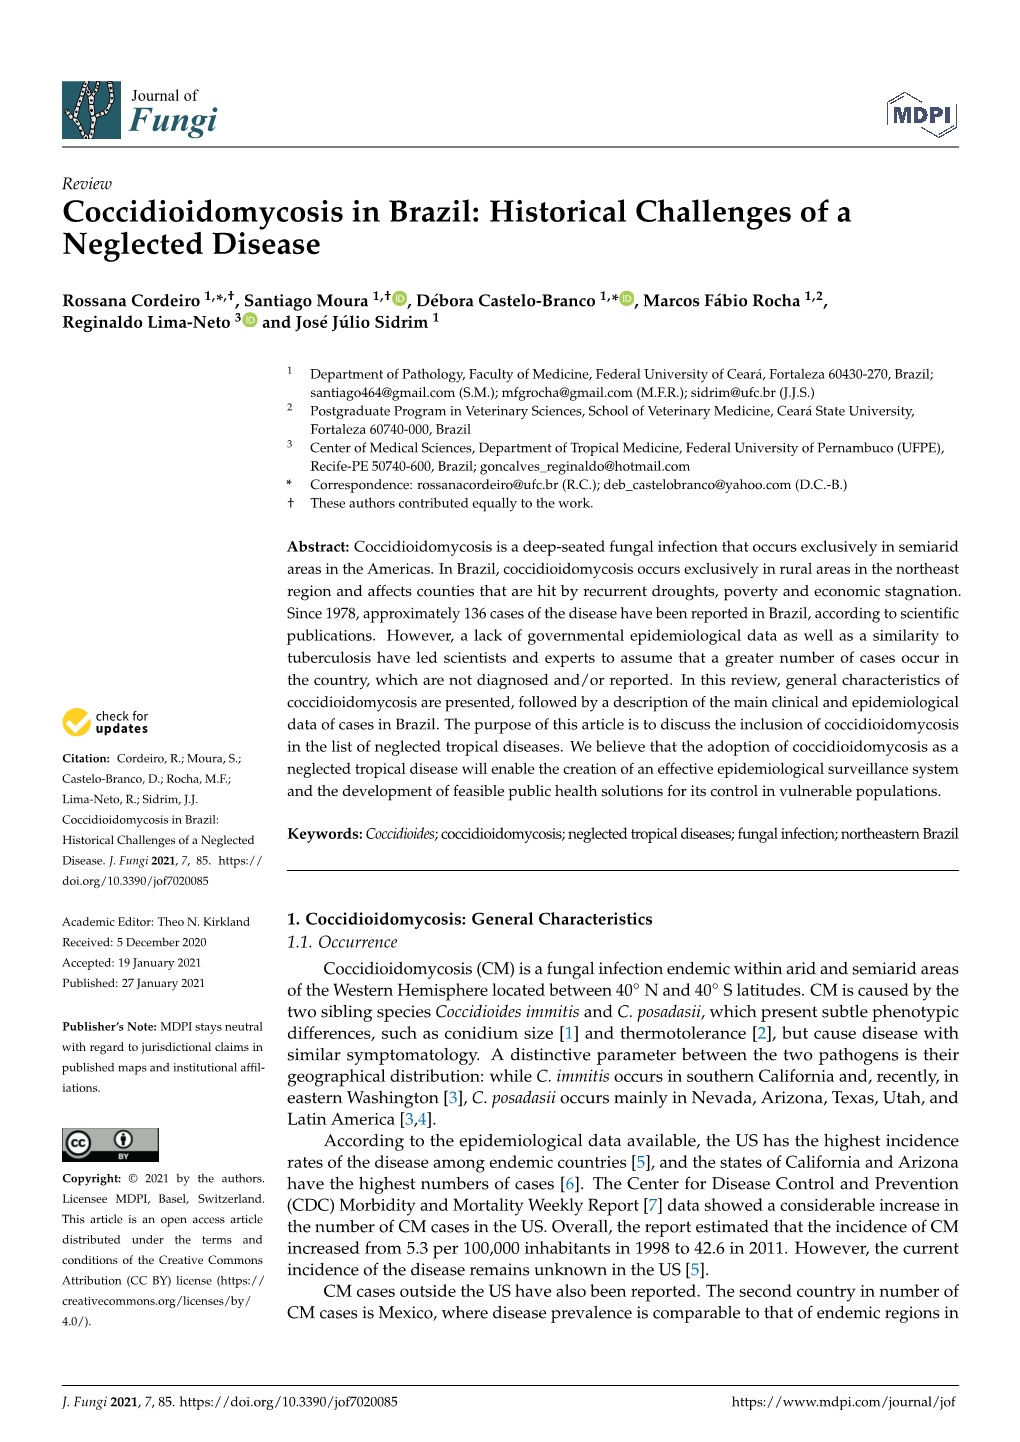 Coccidioidomycosis in Brazil: Historical Challenges of a Neglected Disease